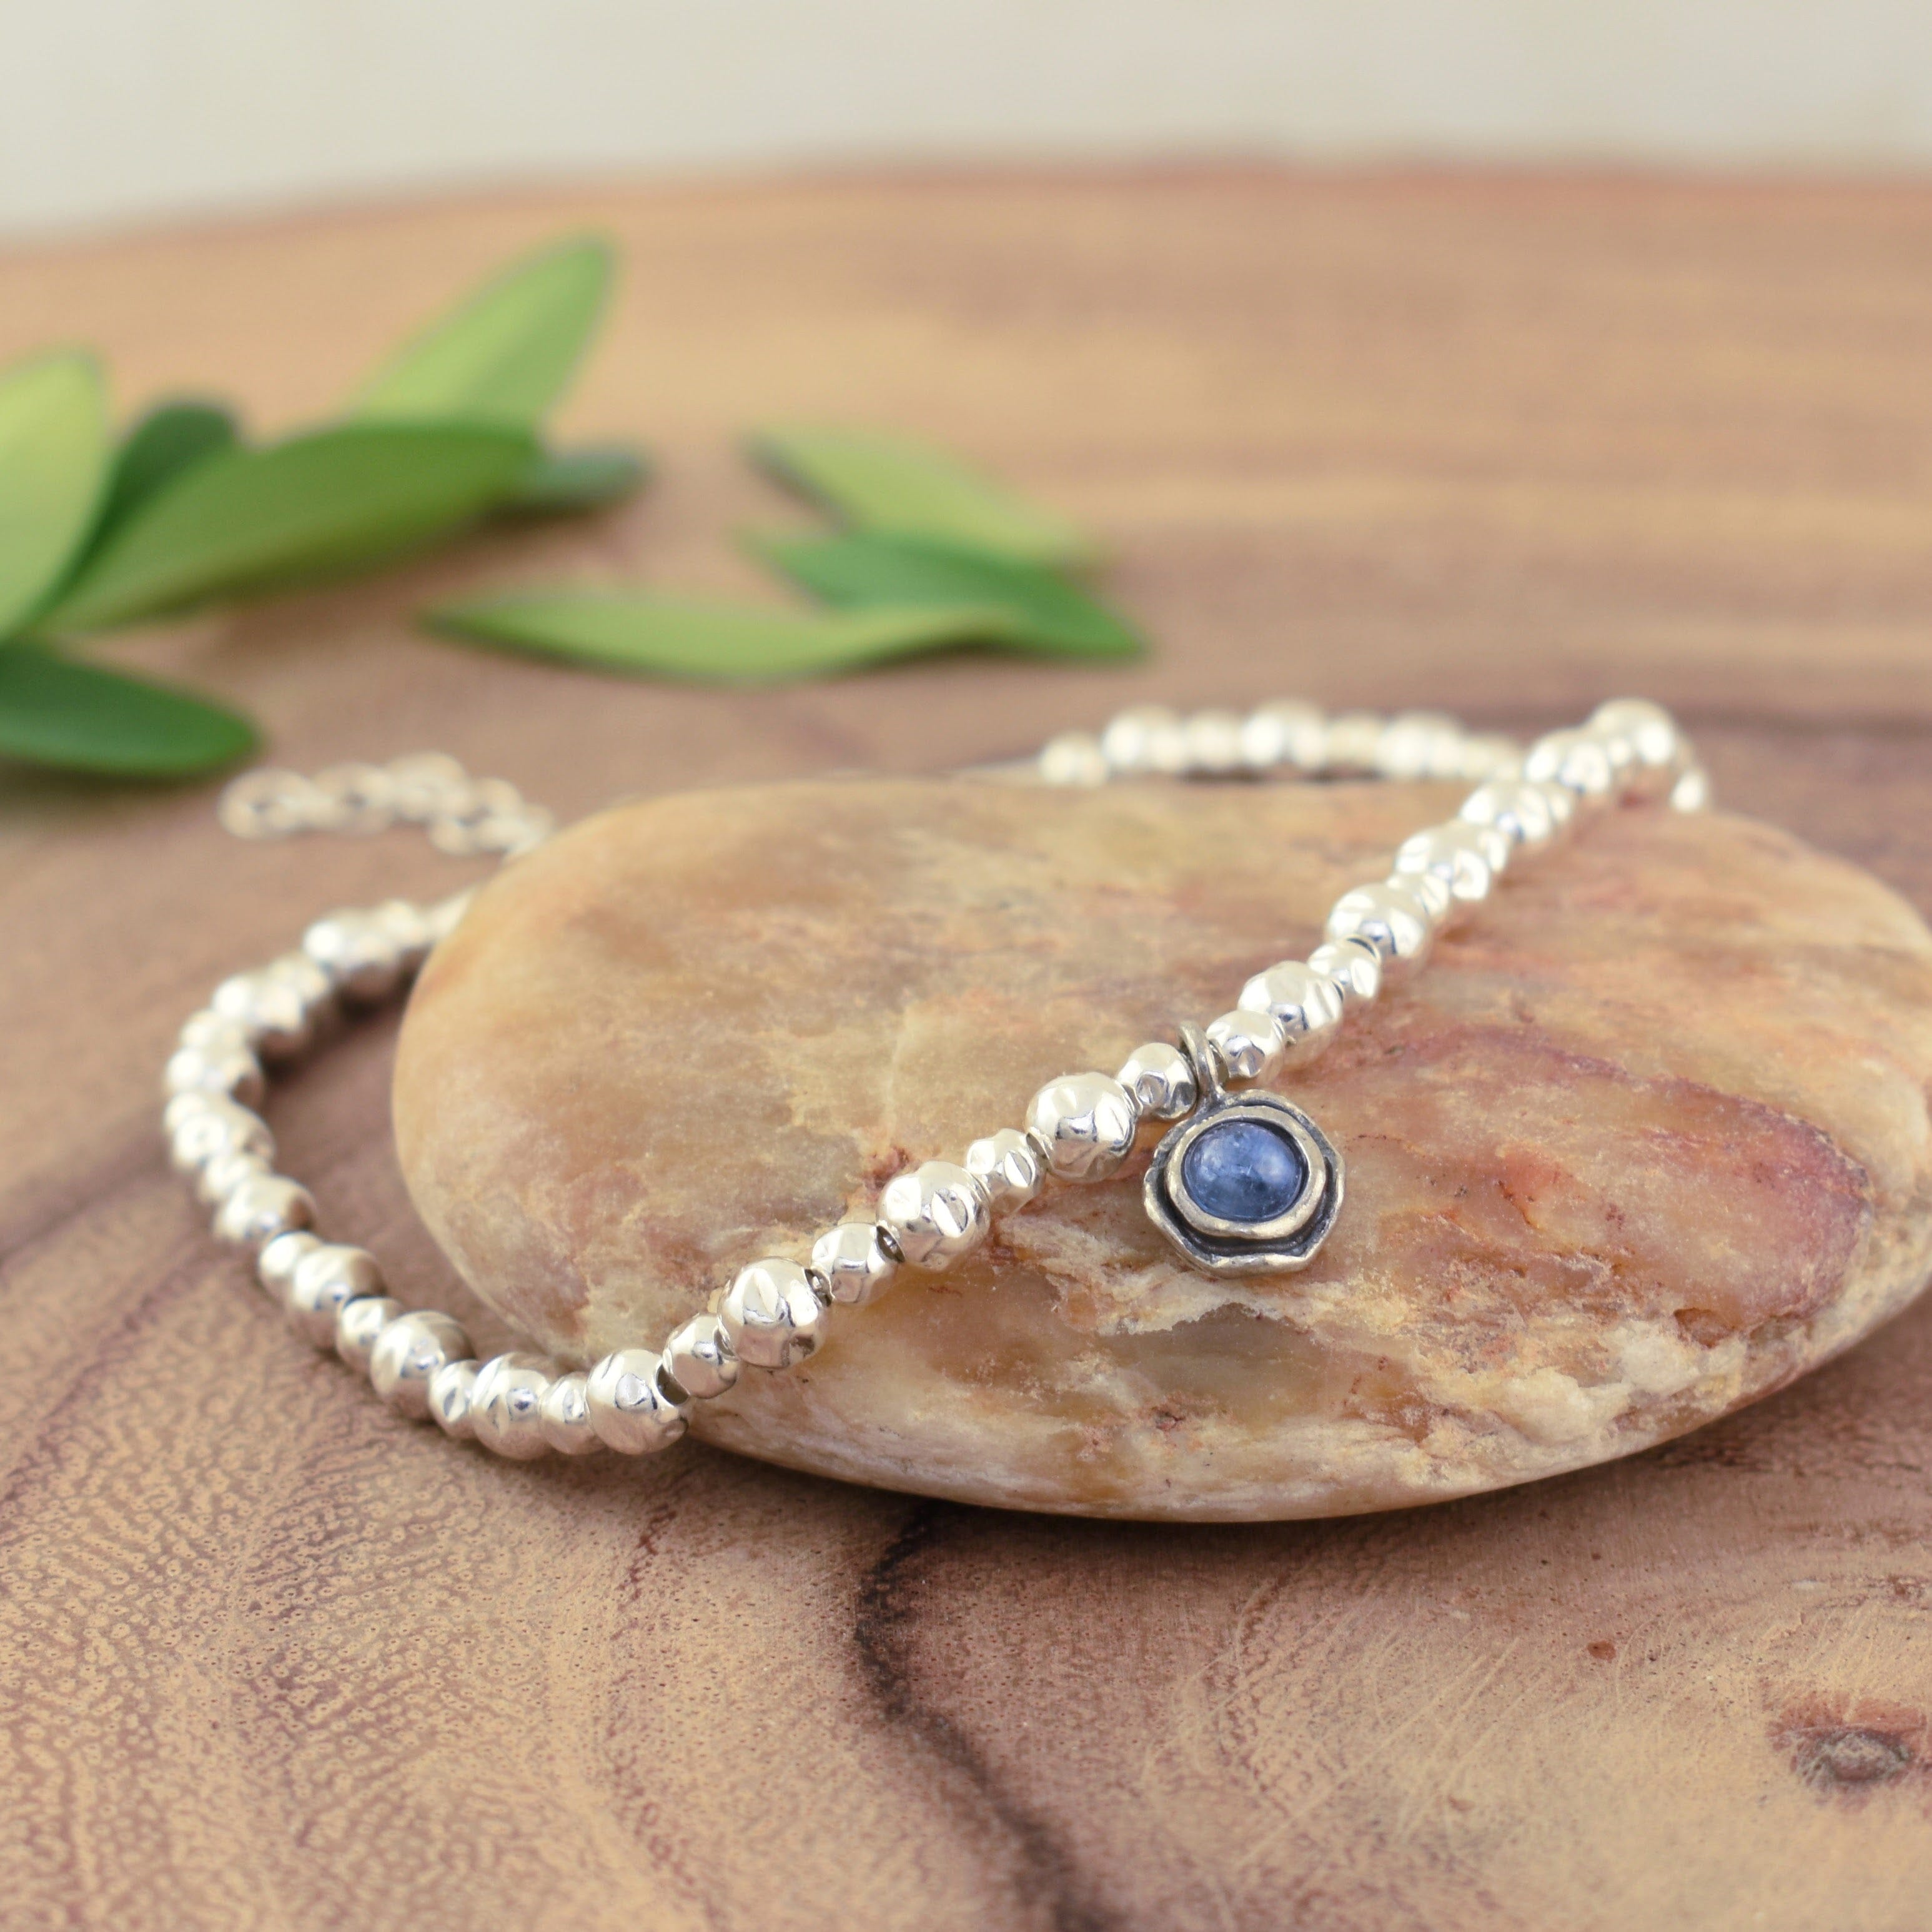 Blue Jean Bracelet featuring high polished sterling silver beads and a single blue kyanite stone